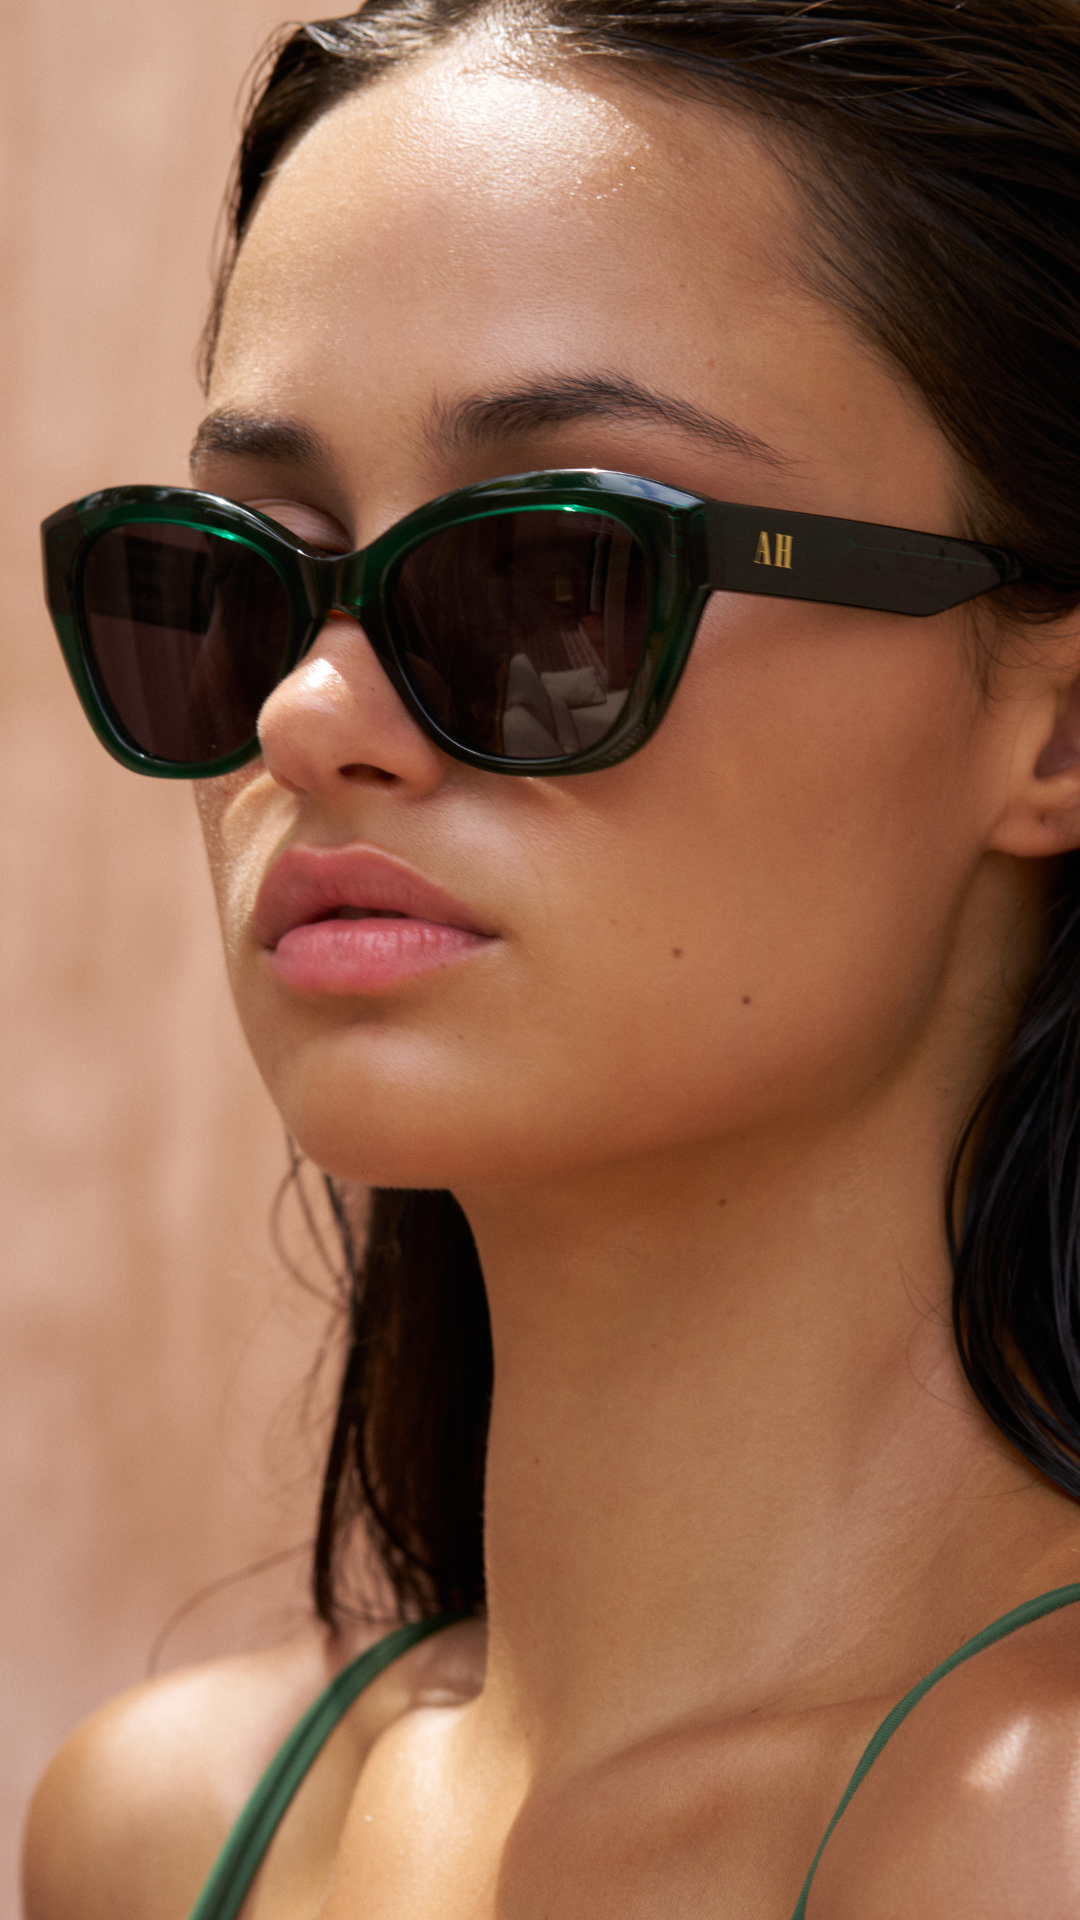 Translucent green luxury sunglasses for women fitting on a small face, smaller face with ANEA HILL AH logo on the side in gold.